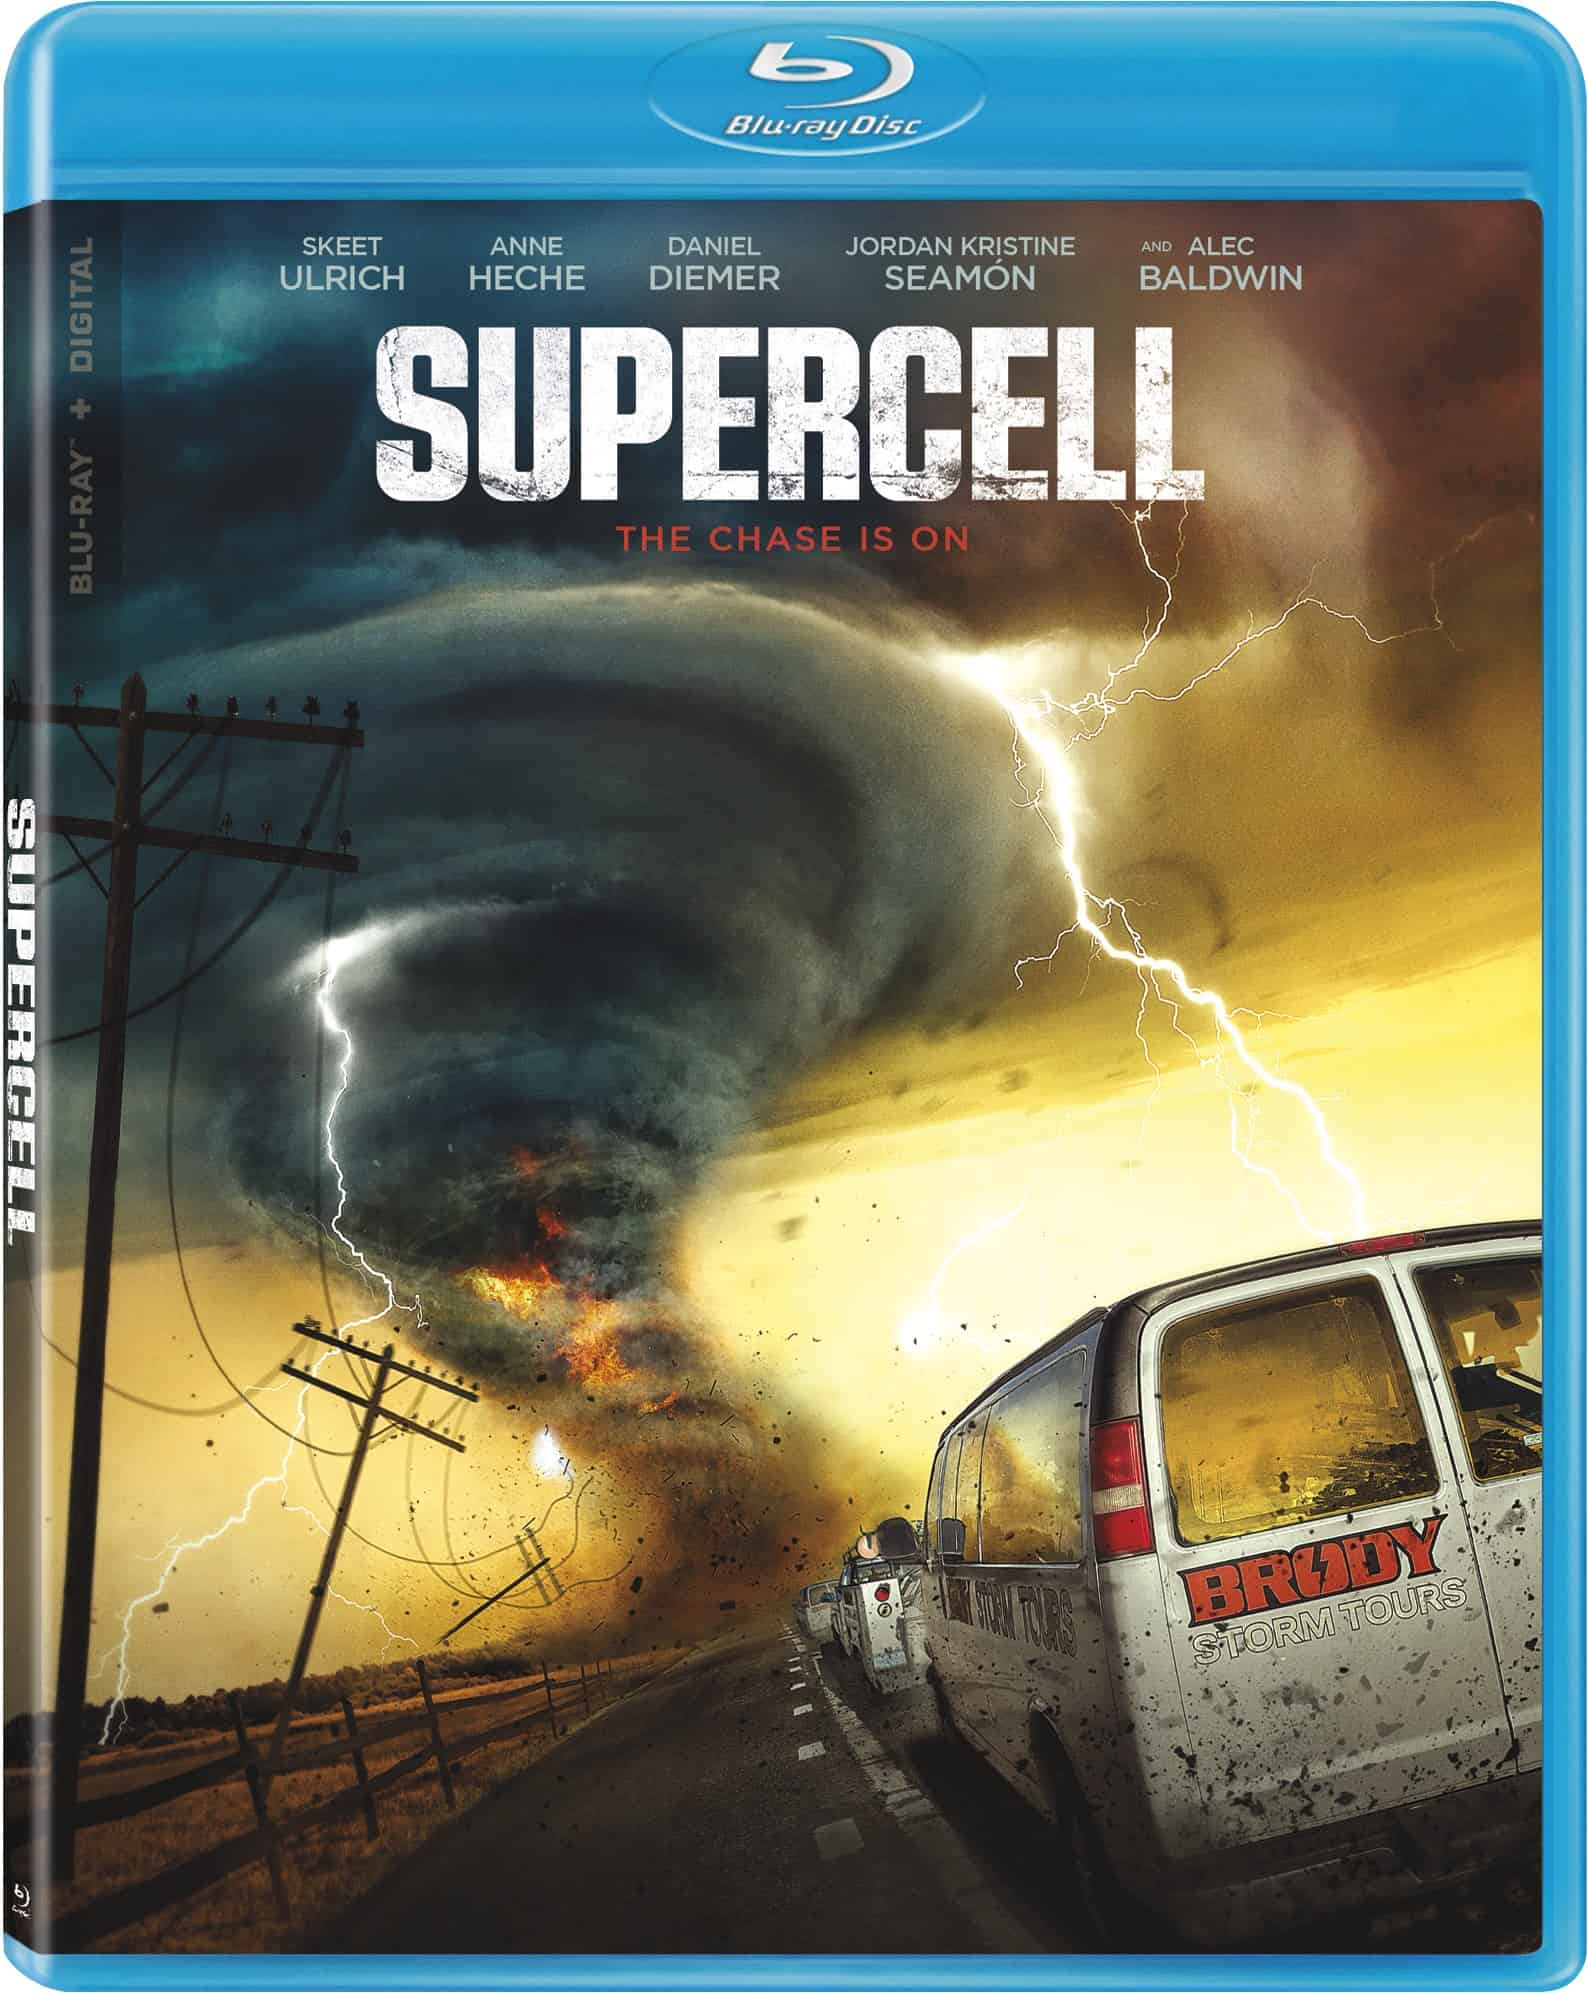 Supercell comes to Blu-ray on May 2nd 26